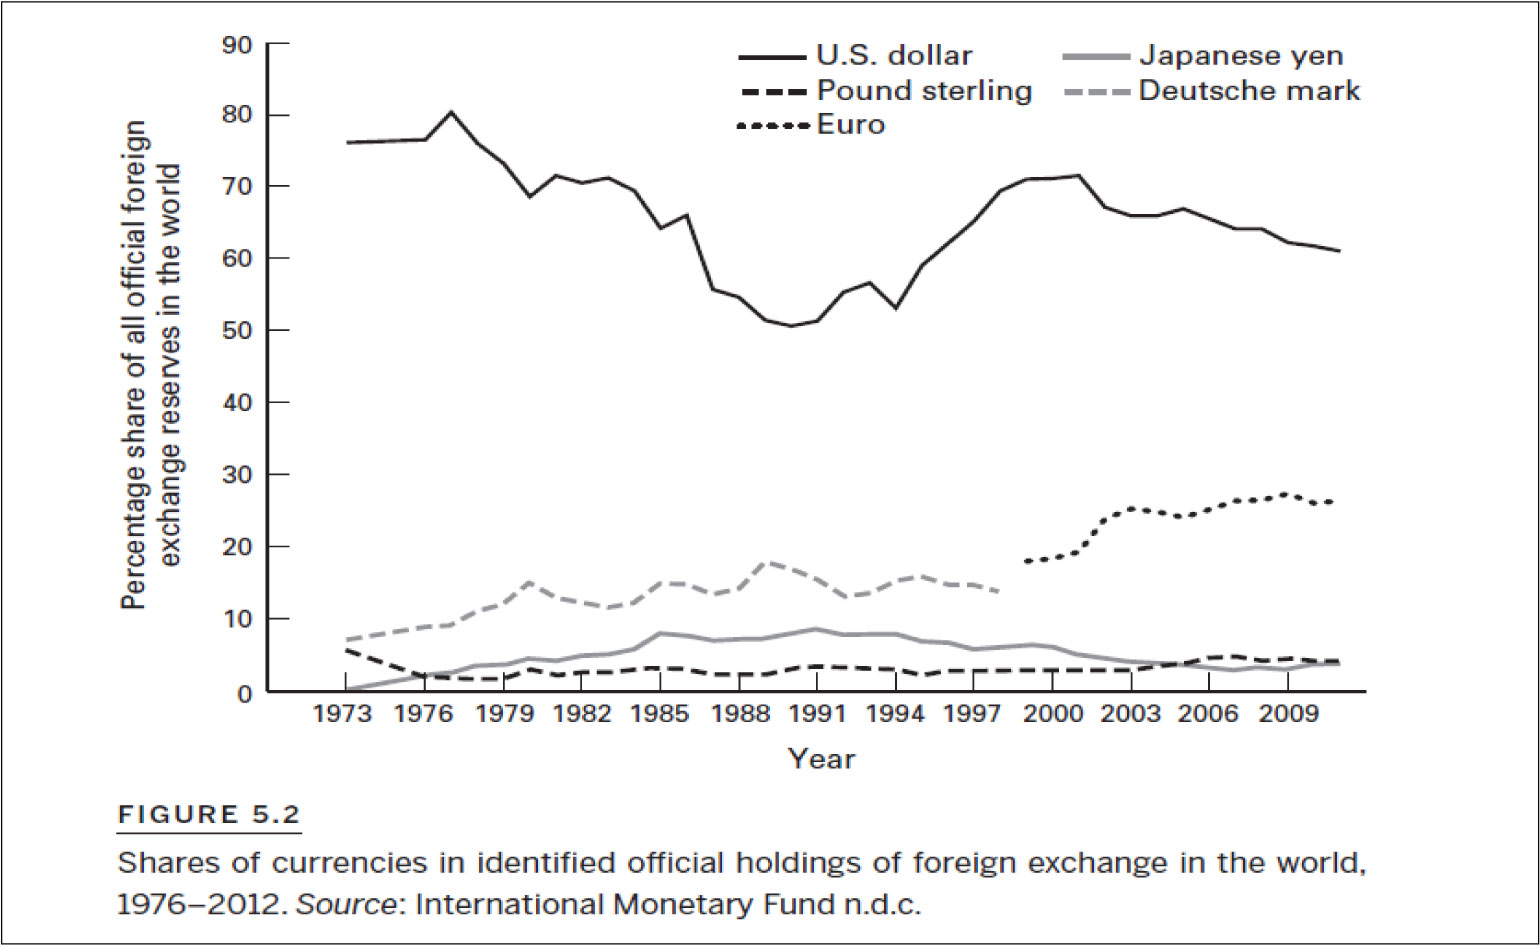 Shares of currencies in identified official holdings of foreings exchange in the world, 1976-2012